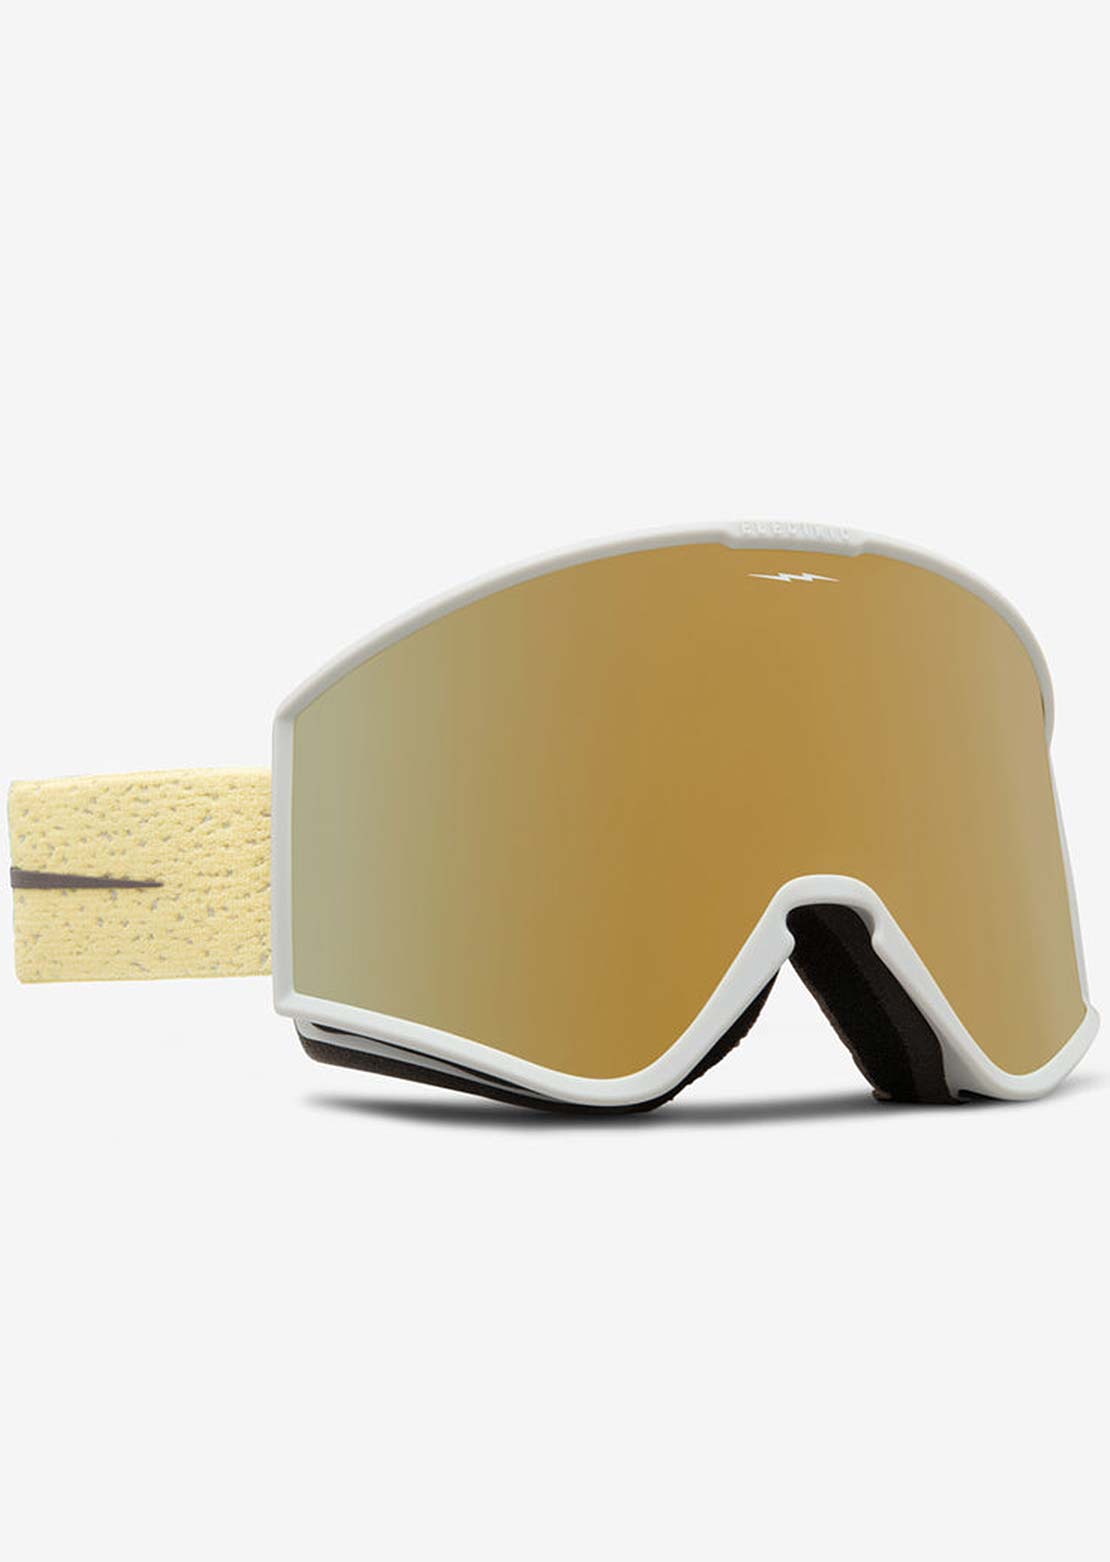 Electric Kleveland Snow Goggles Canna Speckle/Gold Chrome